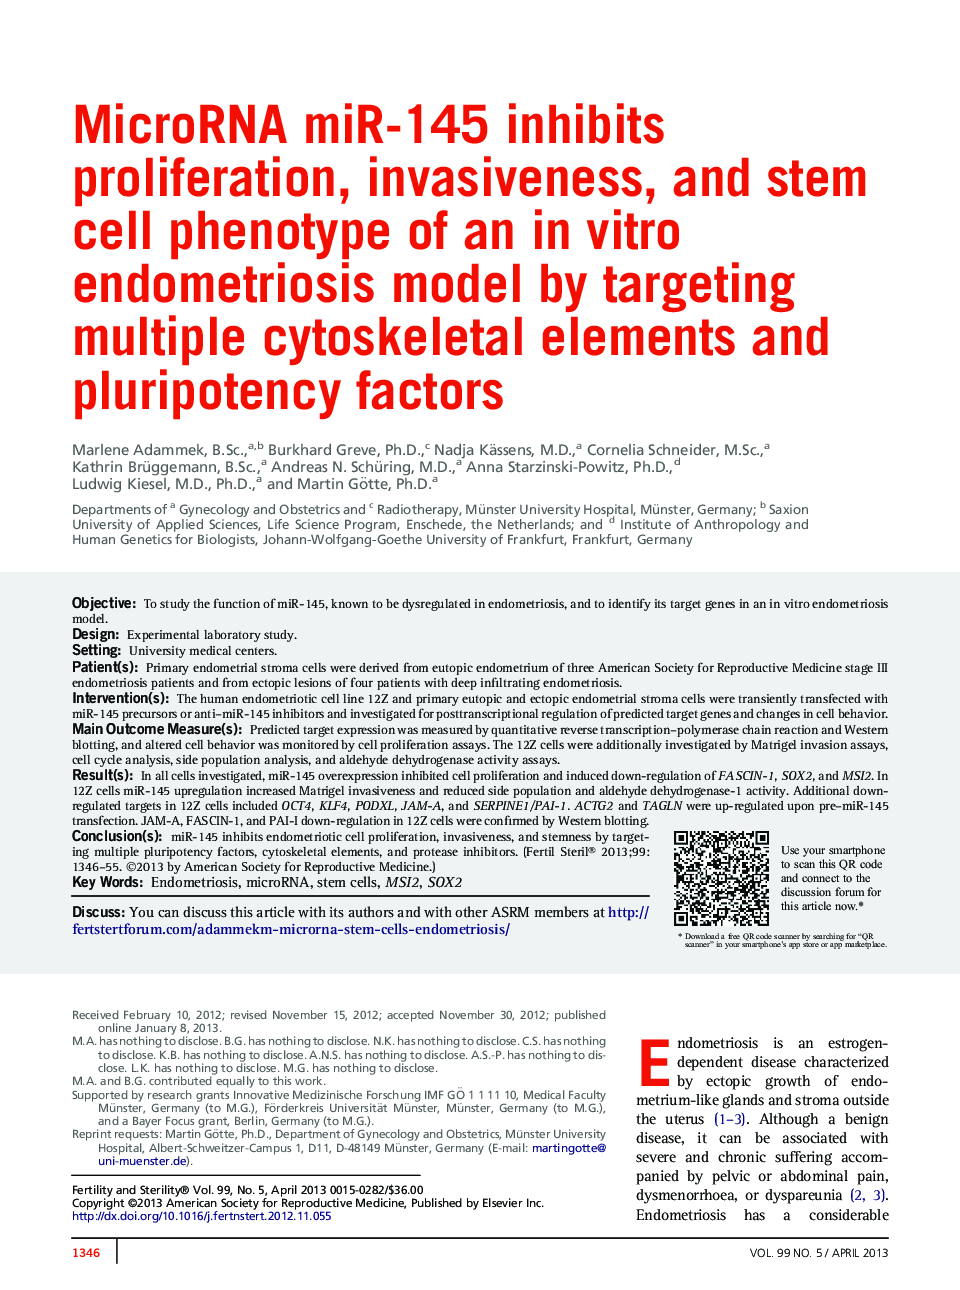 MicroRNA miR-145 inhibits proliferation, invasiveness, and stem cell phenotype of an inÂ vitro endometriosis model by targeting multiple cytoskeletal elements and pluripotency factors